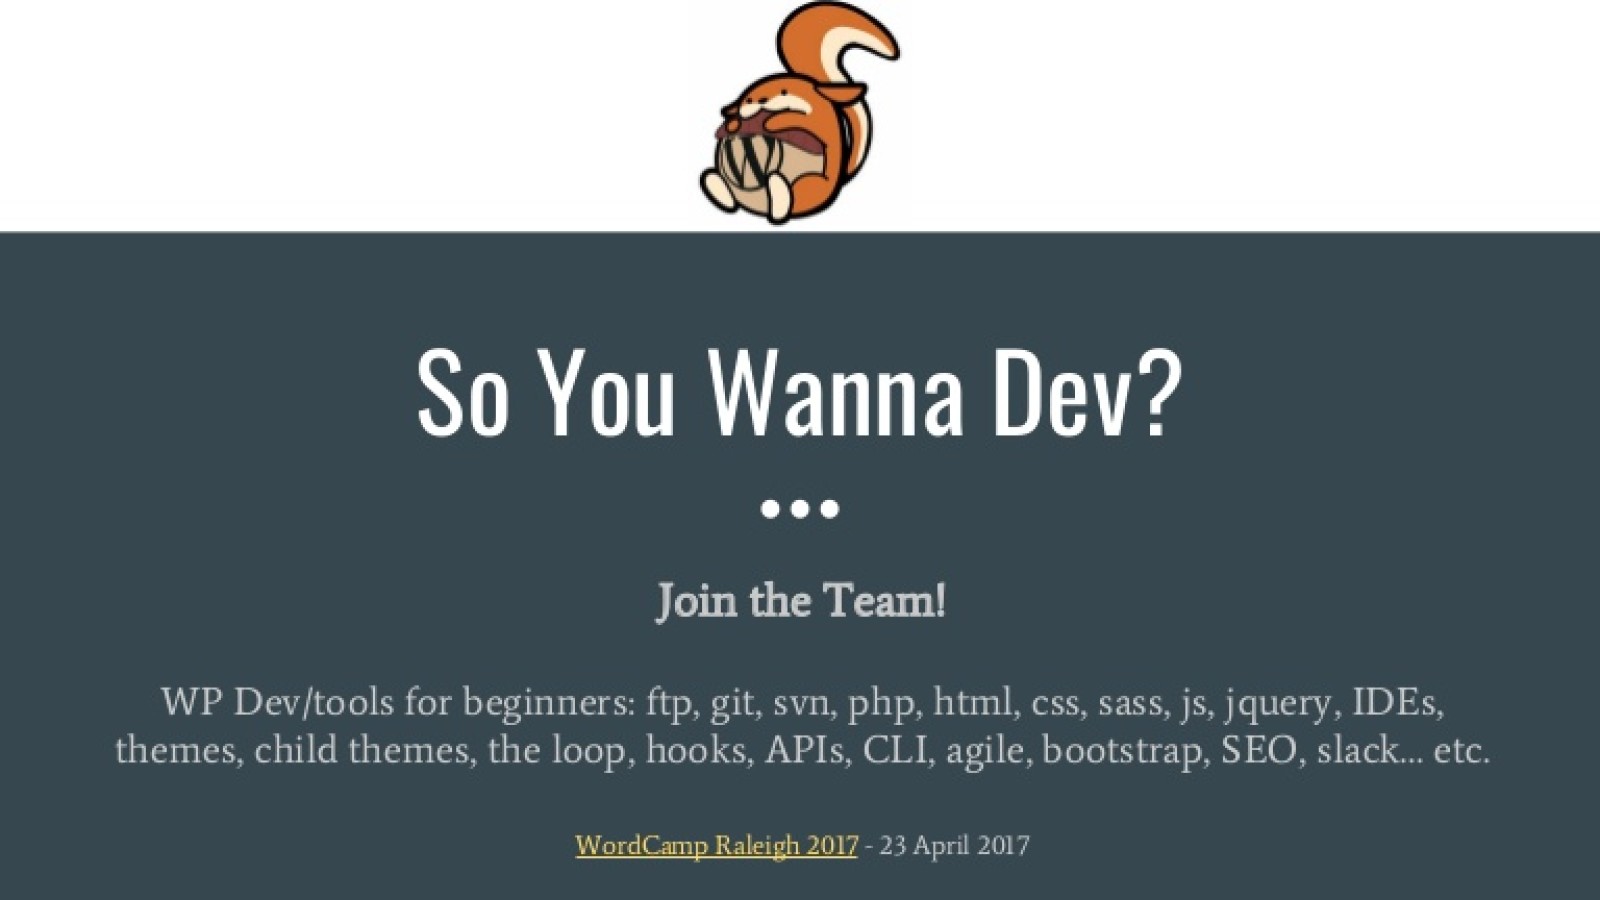 WP Development for Beginners: So, You Wanna Dev? Join the Team!